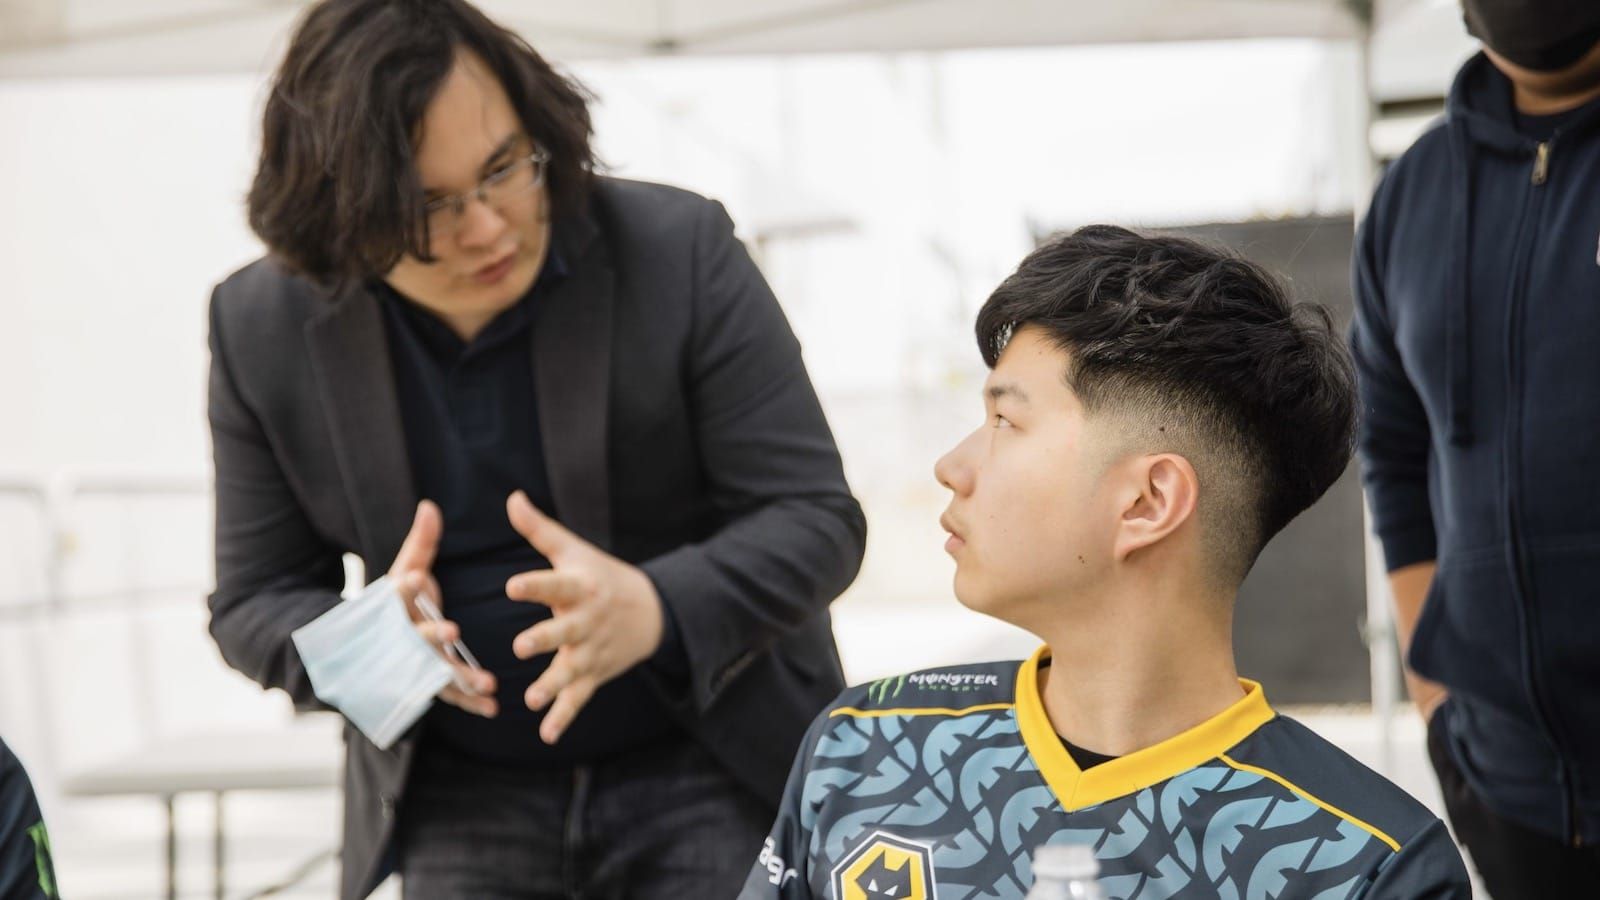 Evil Geniuses coach Peter Dun discussed something over the shoulder of player jojopyun who turns back to listen